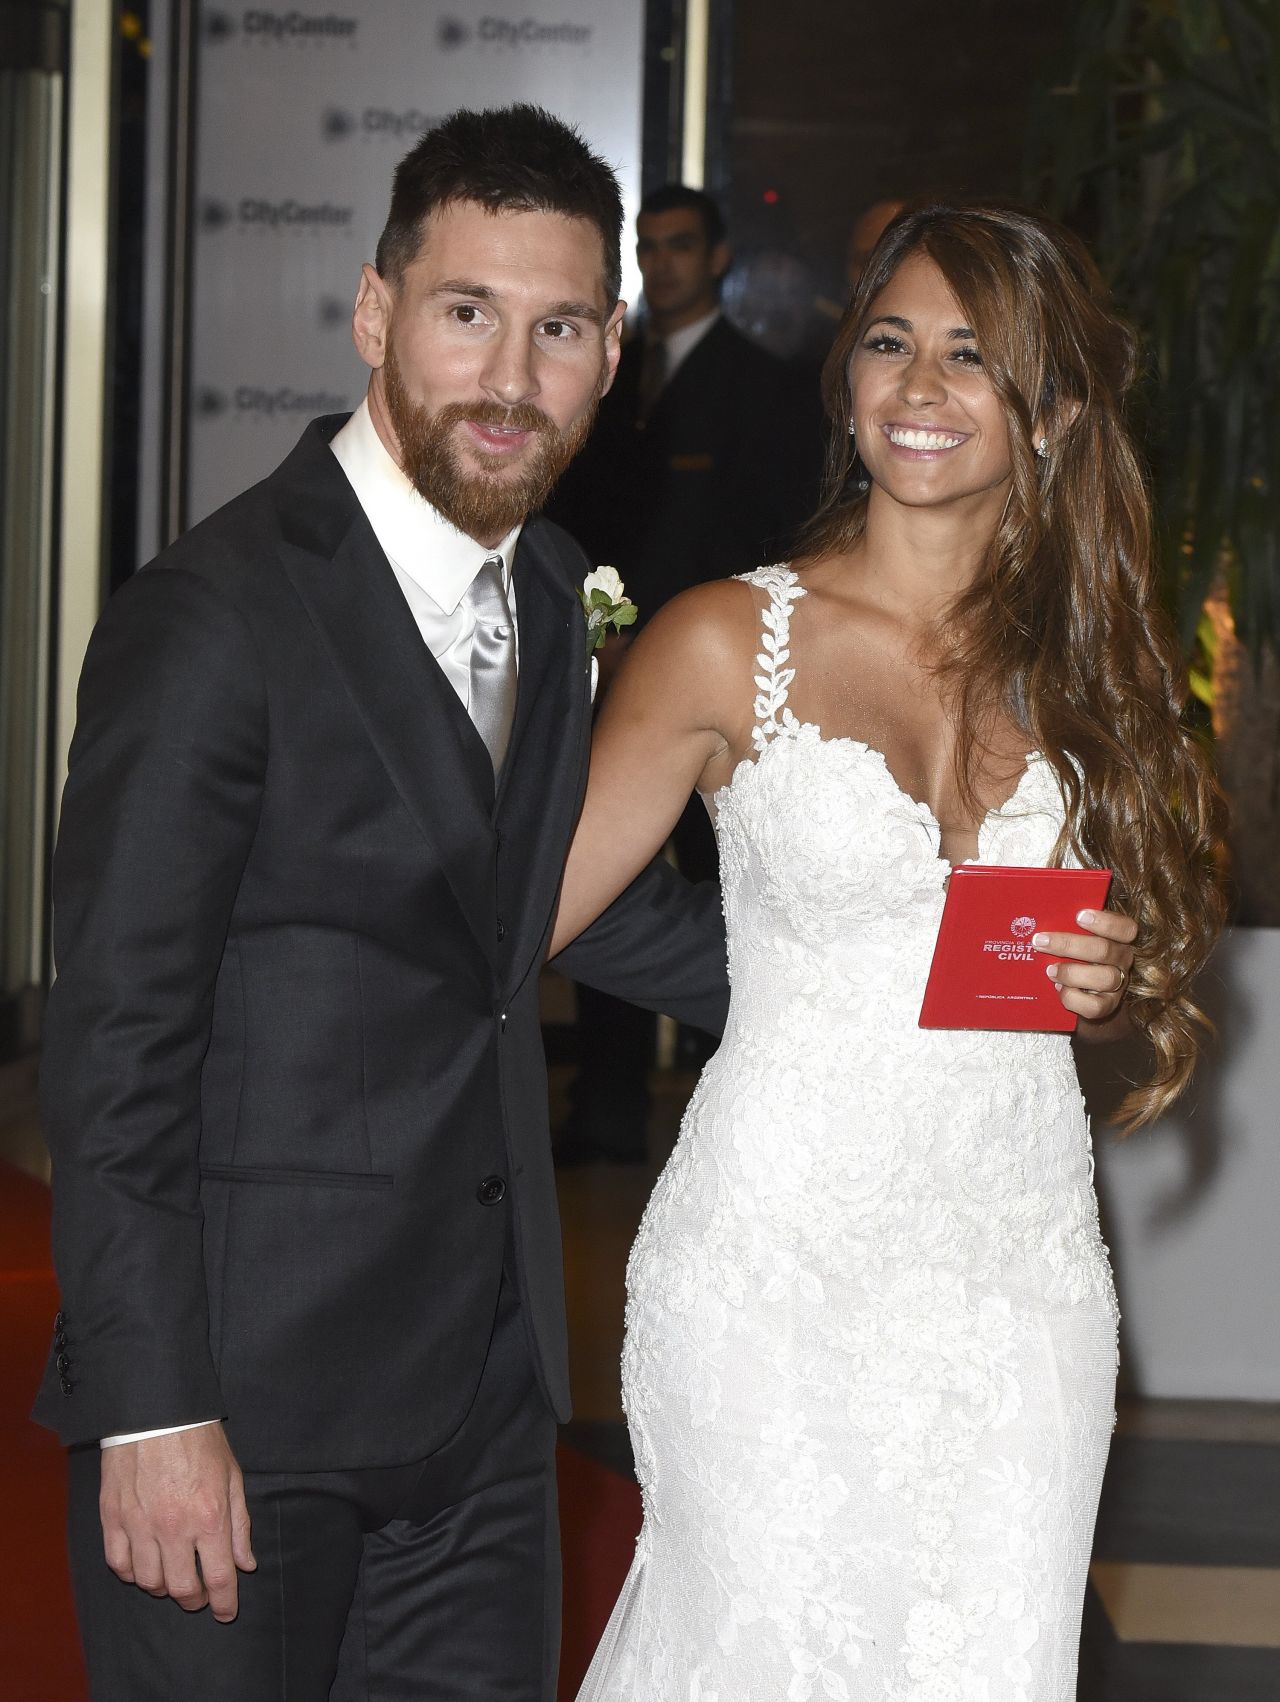 Lionel Messi Wife Antonella Roccuzzo Is One Out Of The Box - Riset